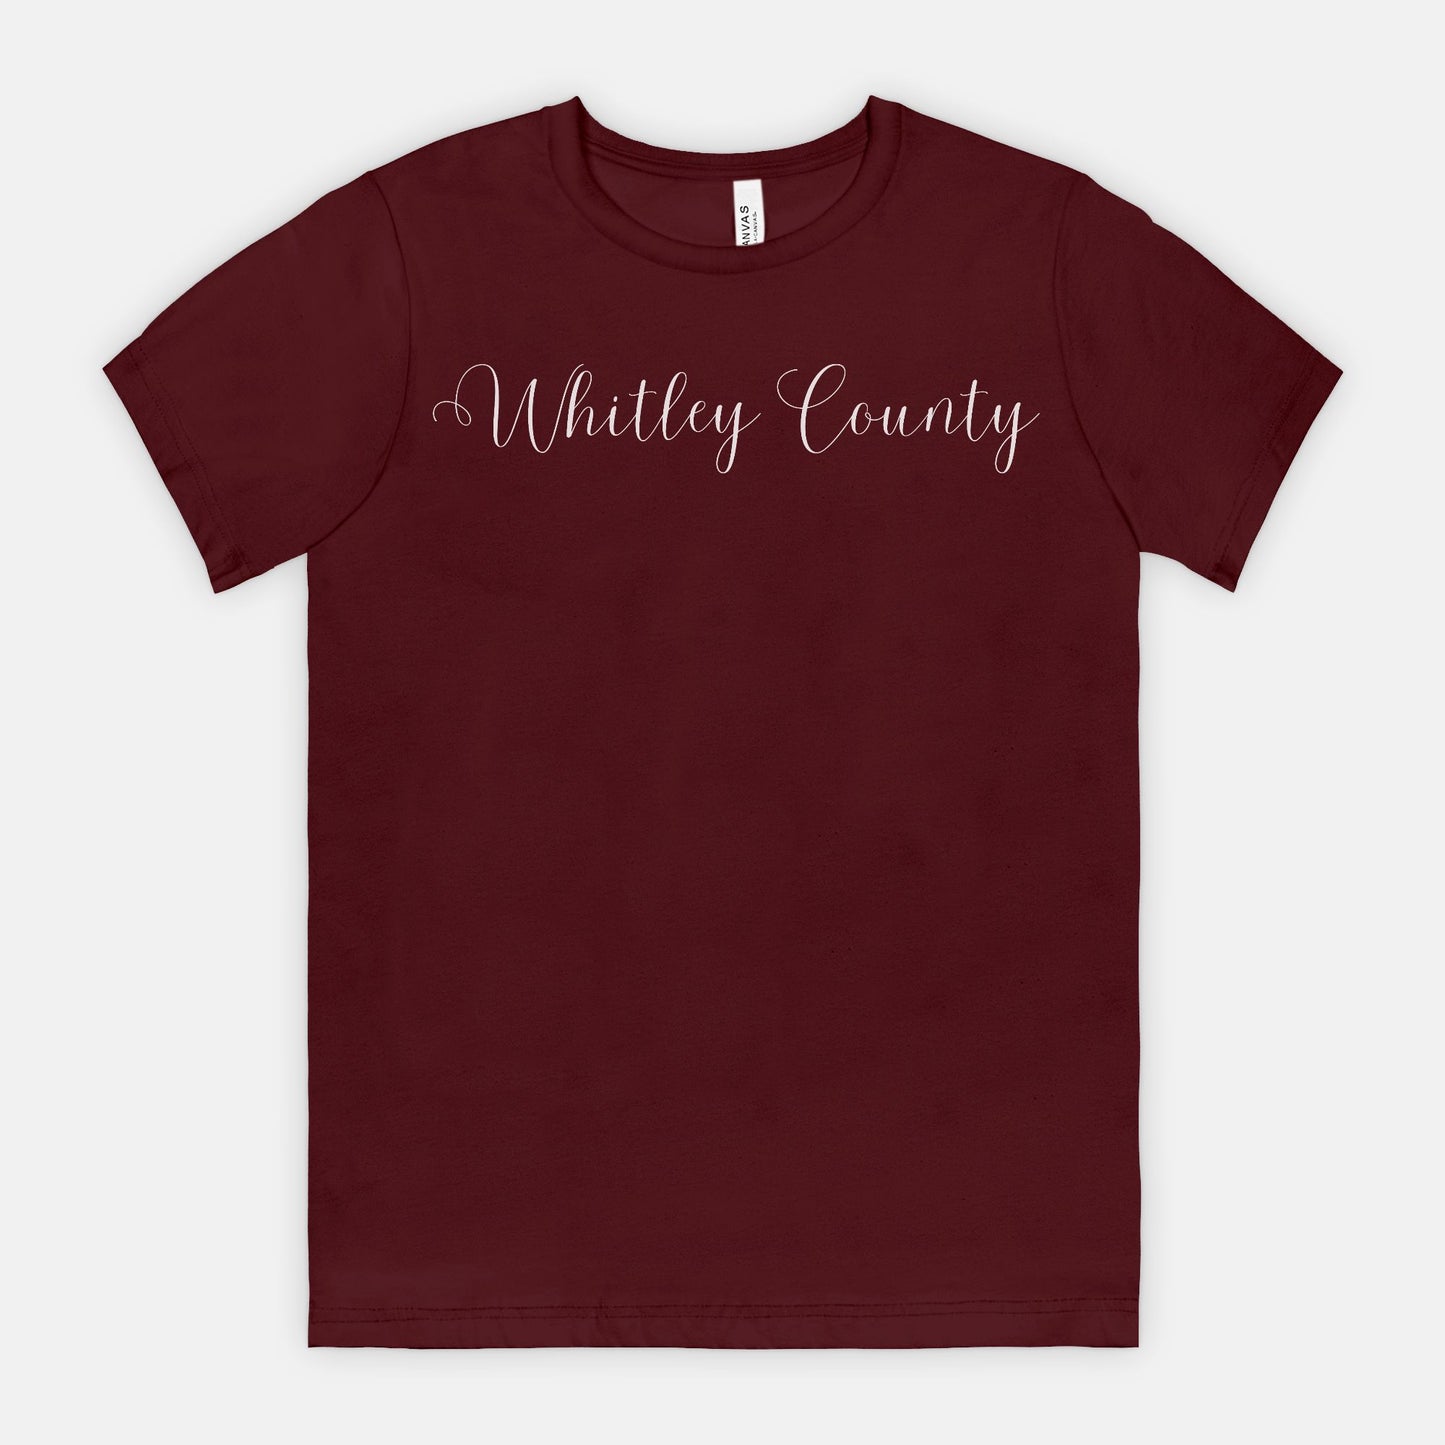 Whitley County T-Shirt